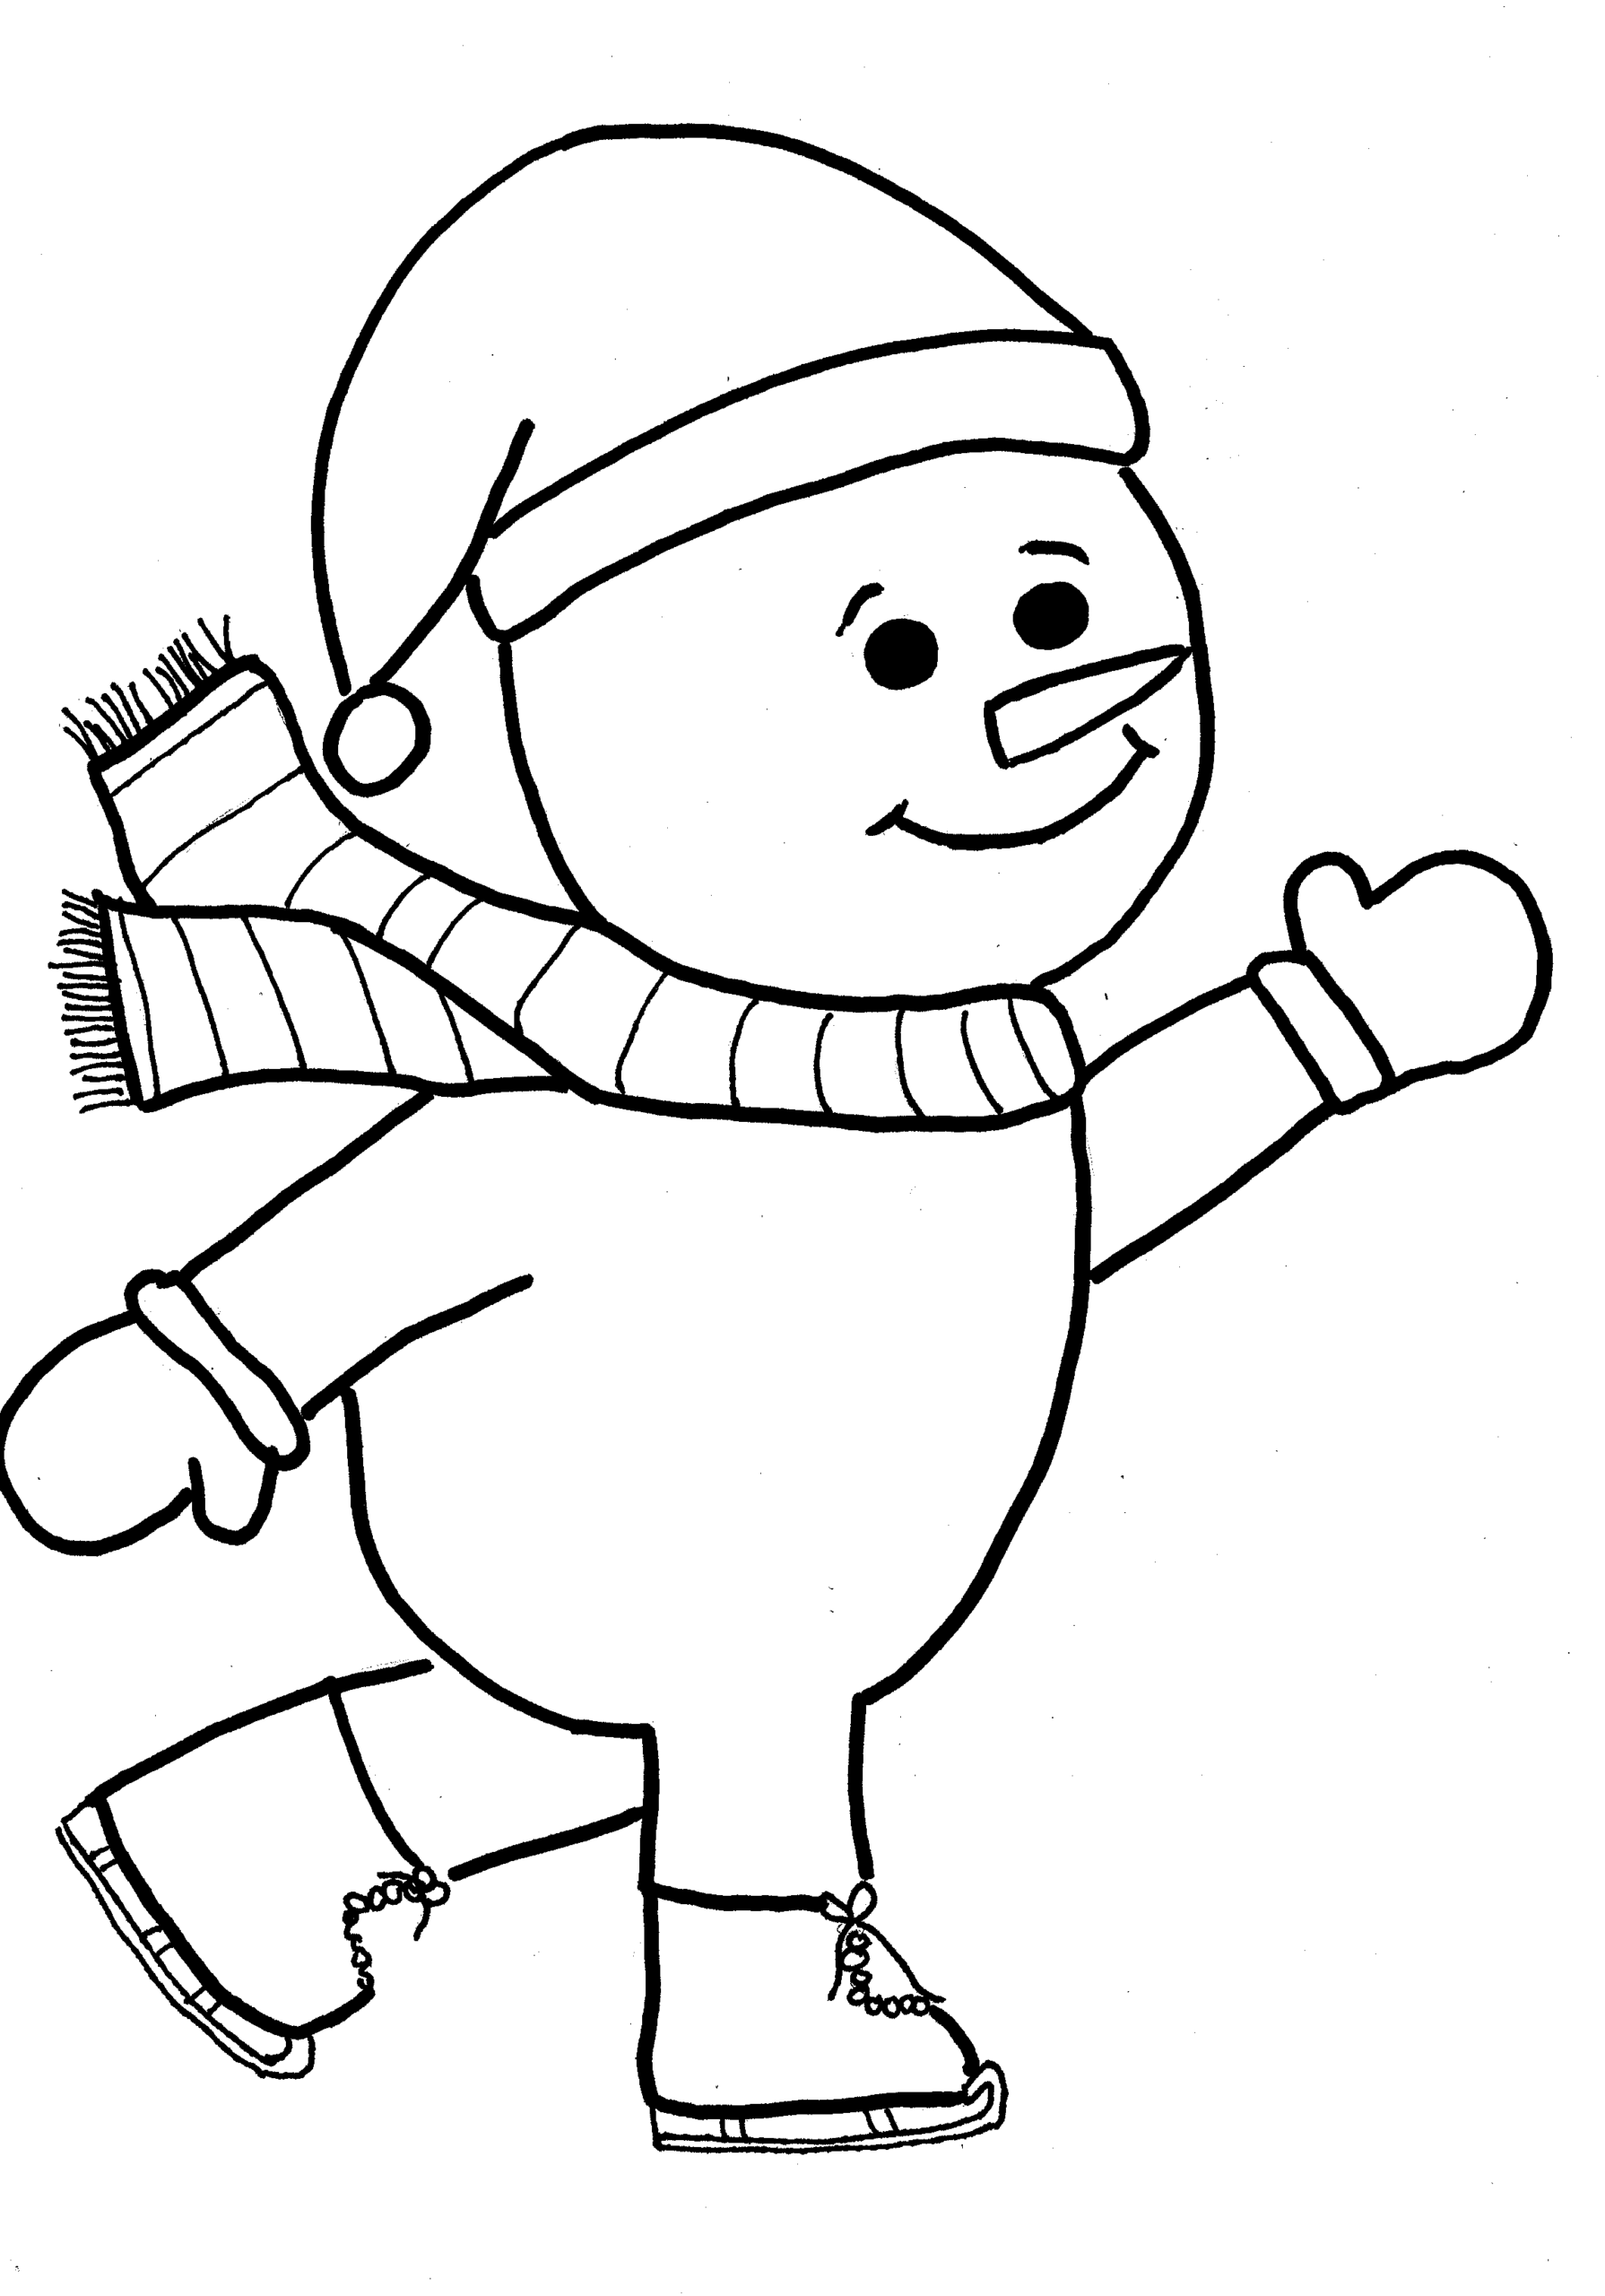 Snowman Coloring Pages Snowman 2 Printable 2021 5603 Coloring4free